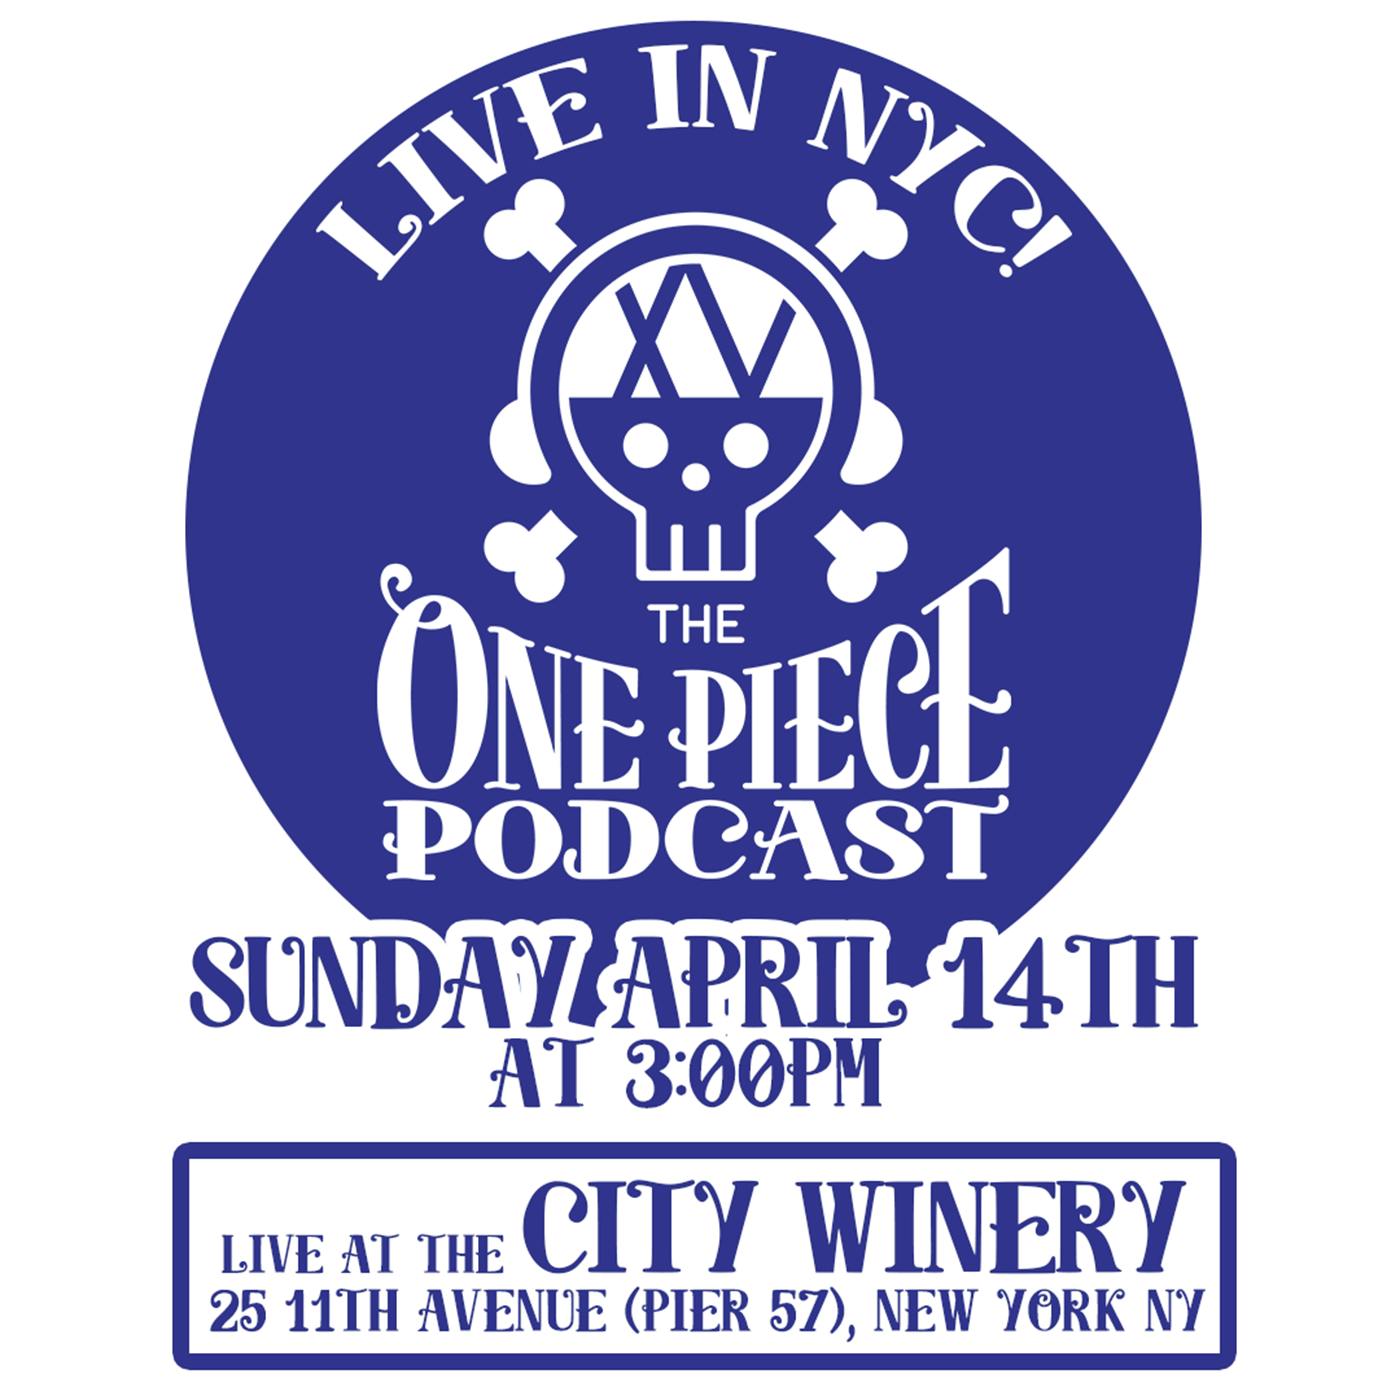 LIVE at The City Winery NYC on April 14th!